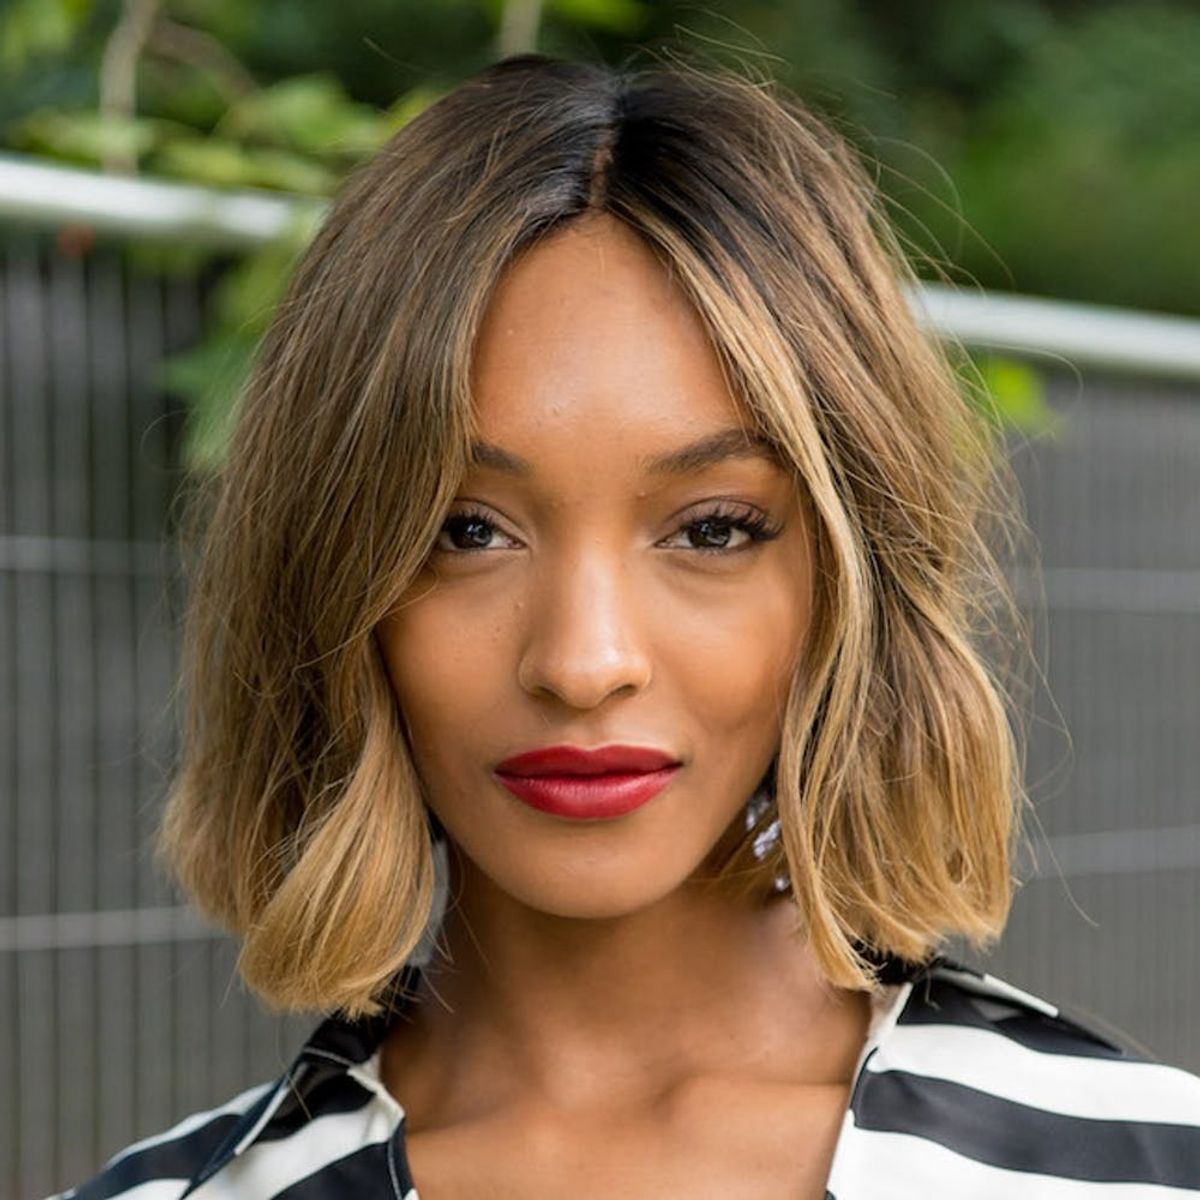 Jourdan Dunn’s New Athleisure Line Will Give Ivy Park a Run for Its Money